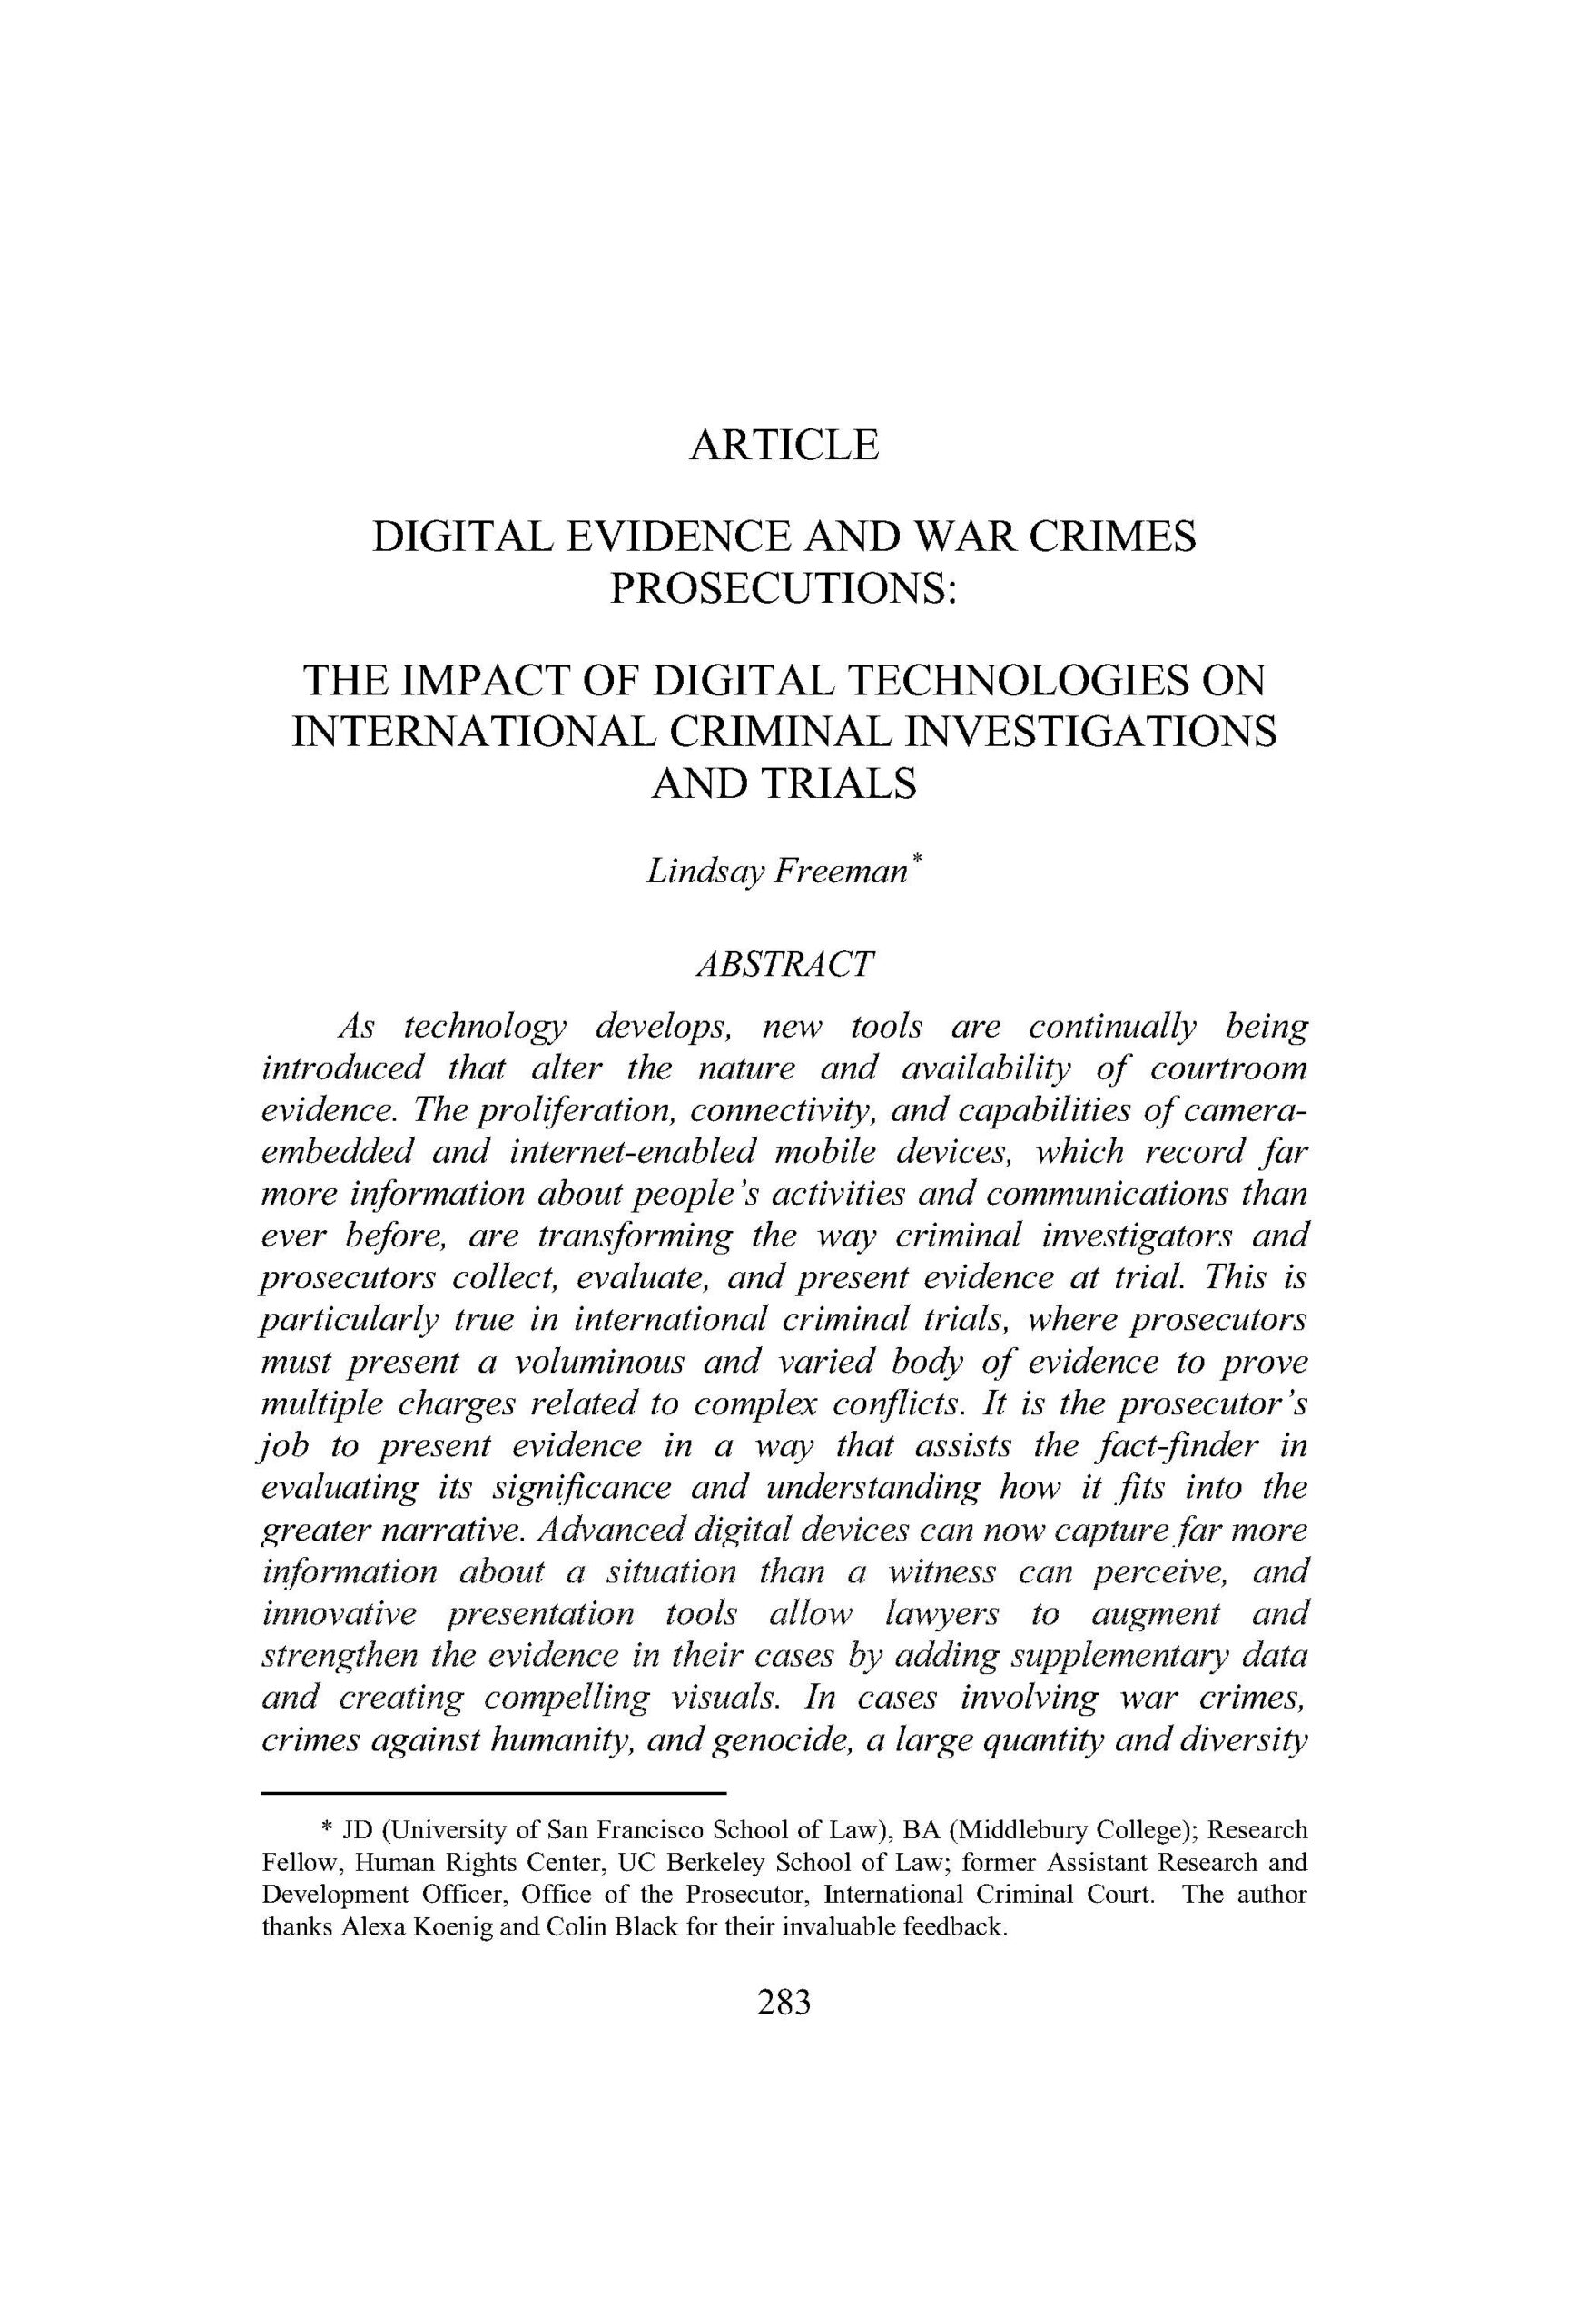 Pages from Digital Evidence and War Crimes Prosecutions- The Impact of Digital Technologies on International Criminal Investigations and Trials